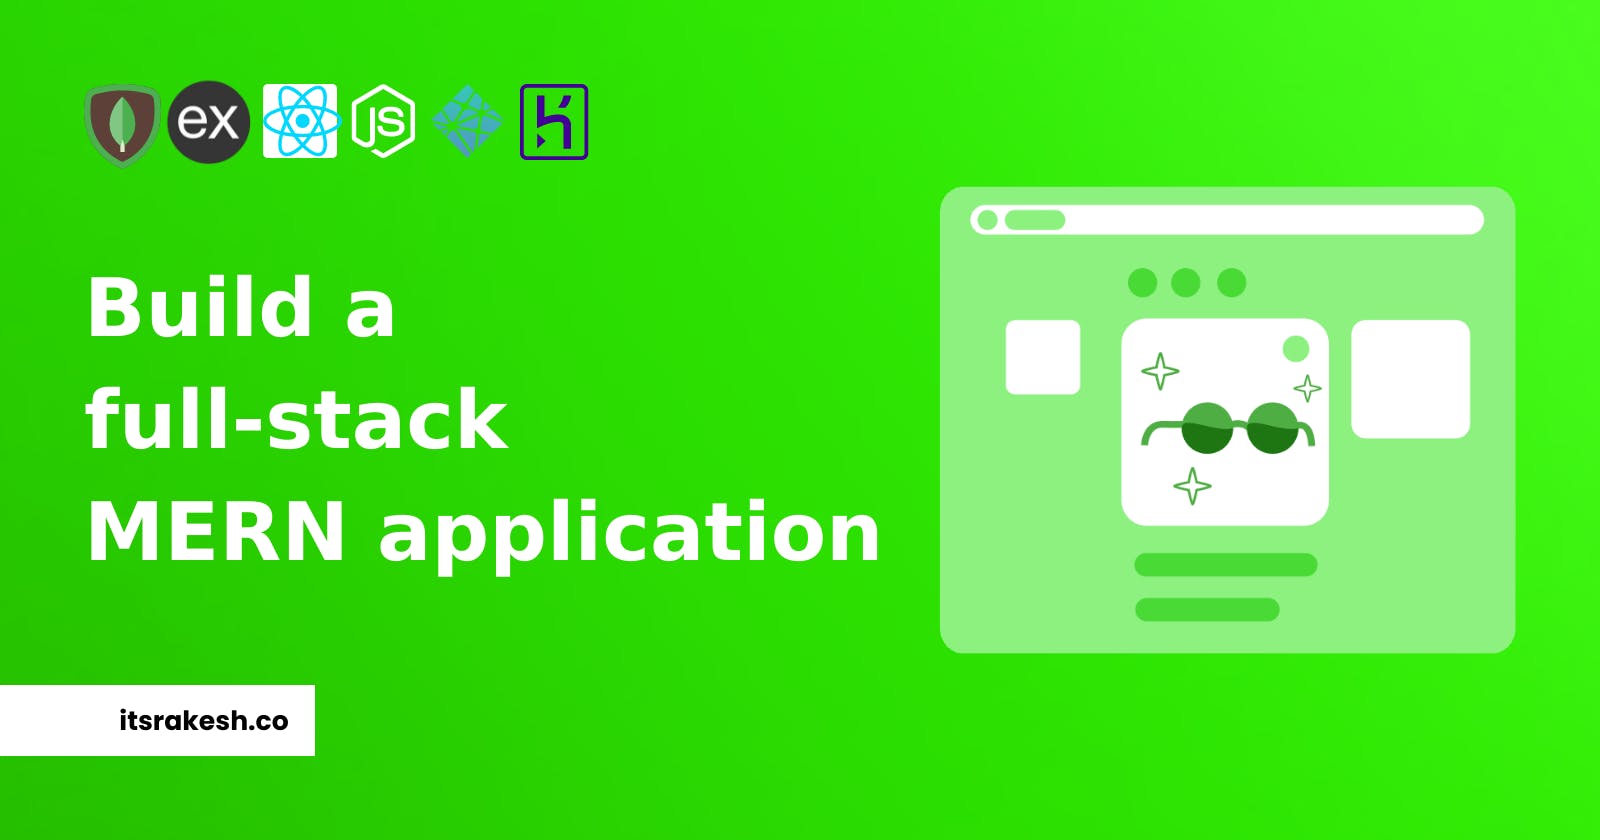 Let's build and deploy a full stack MERN web application